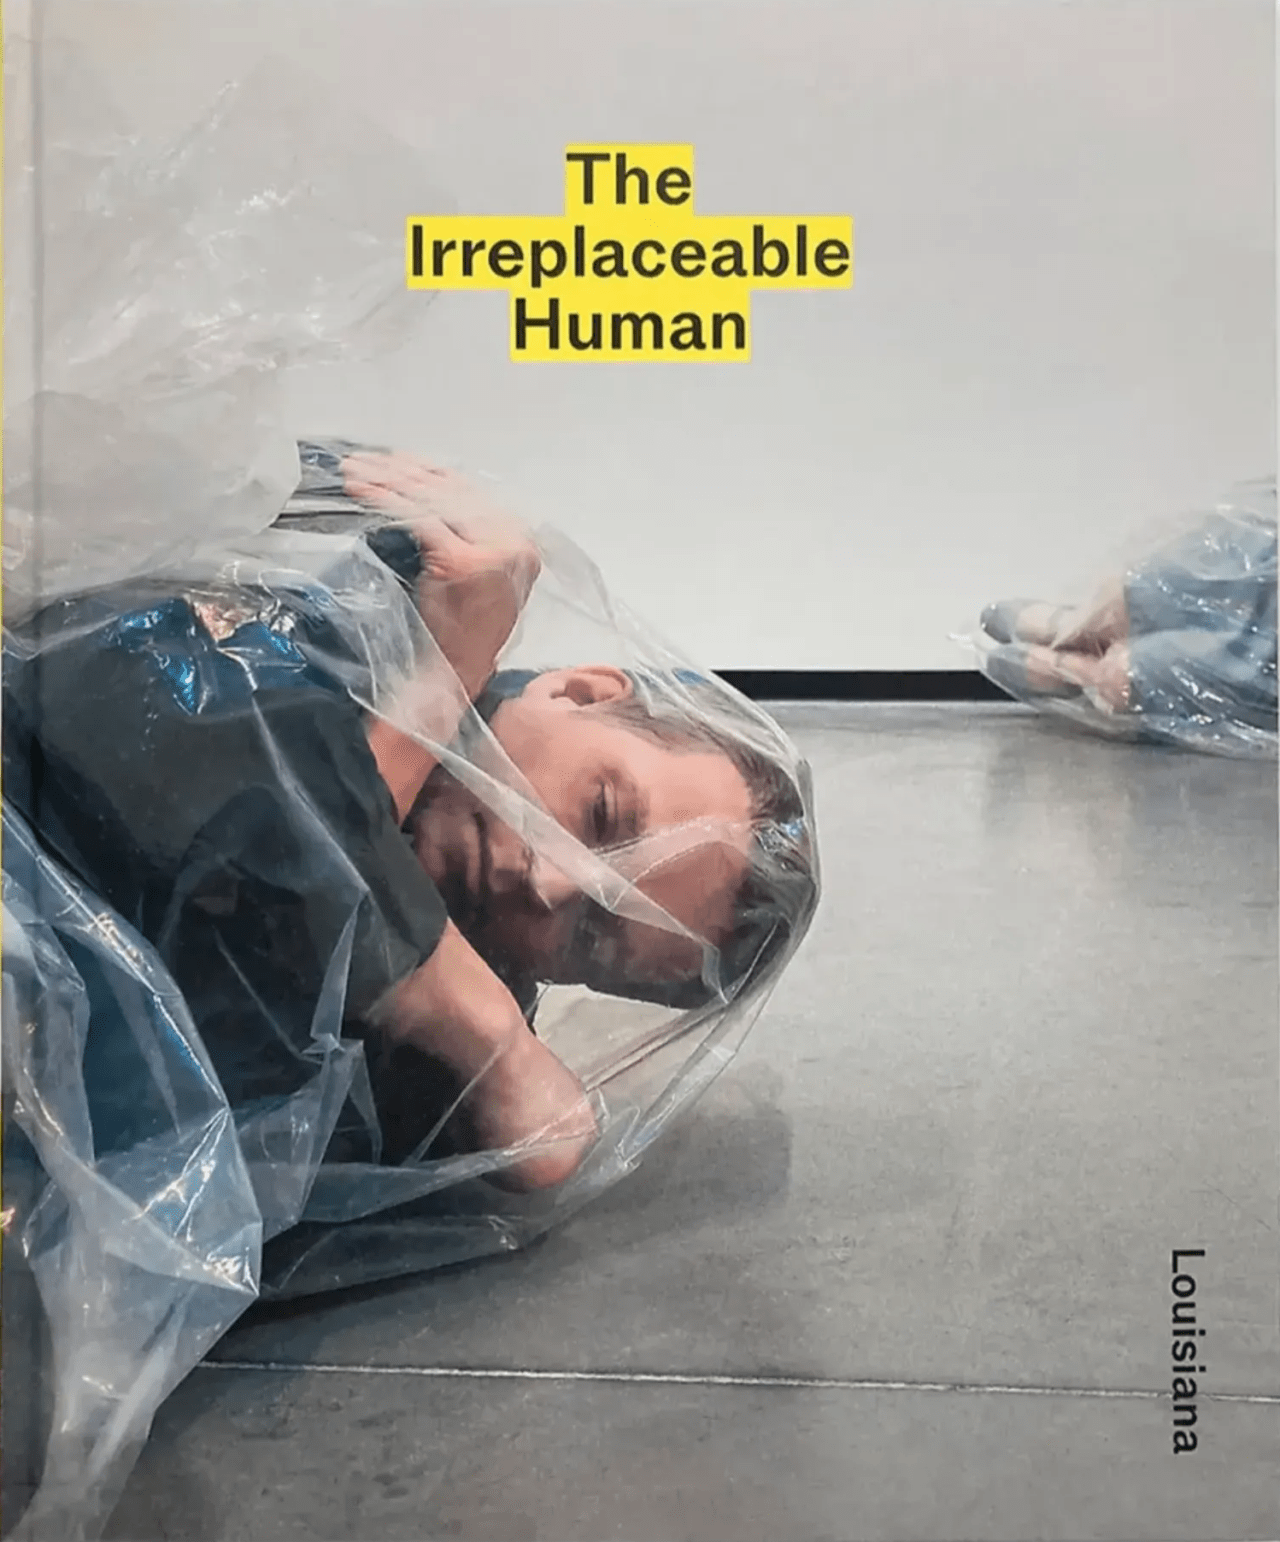 Man and woman on the floor wrapped in plastic